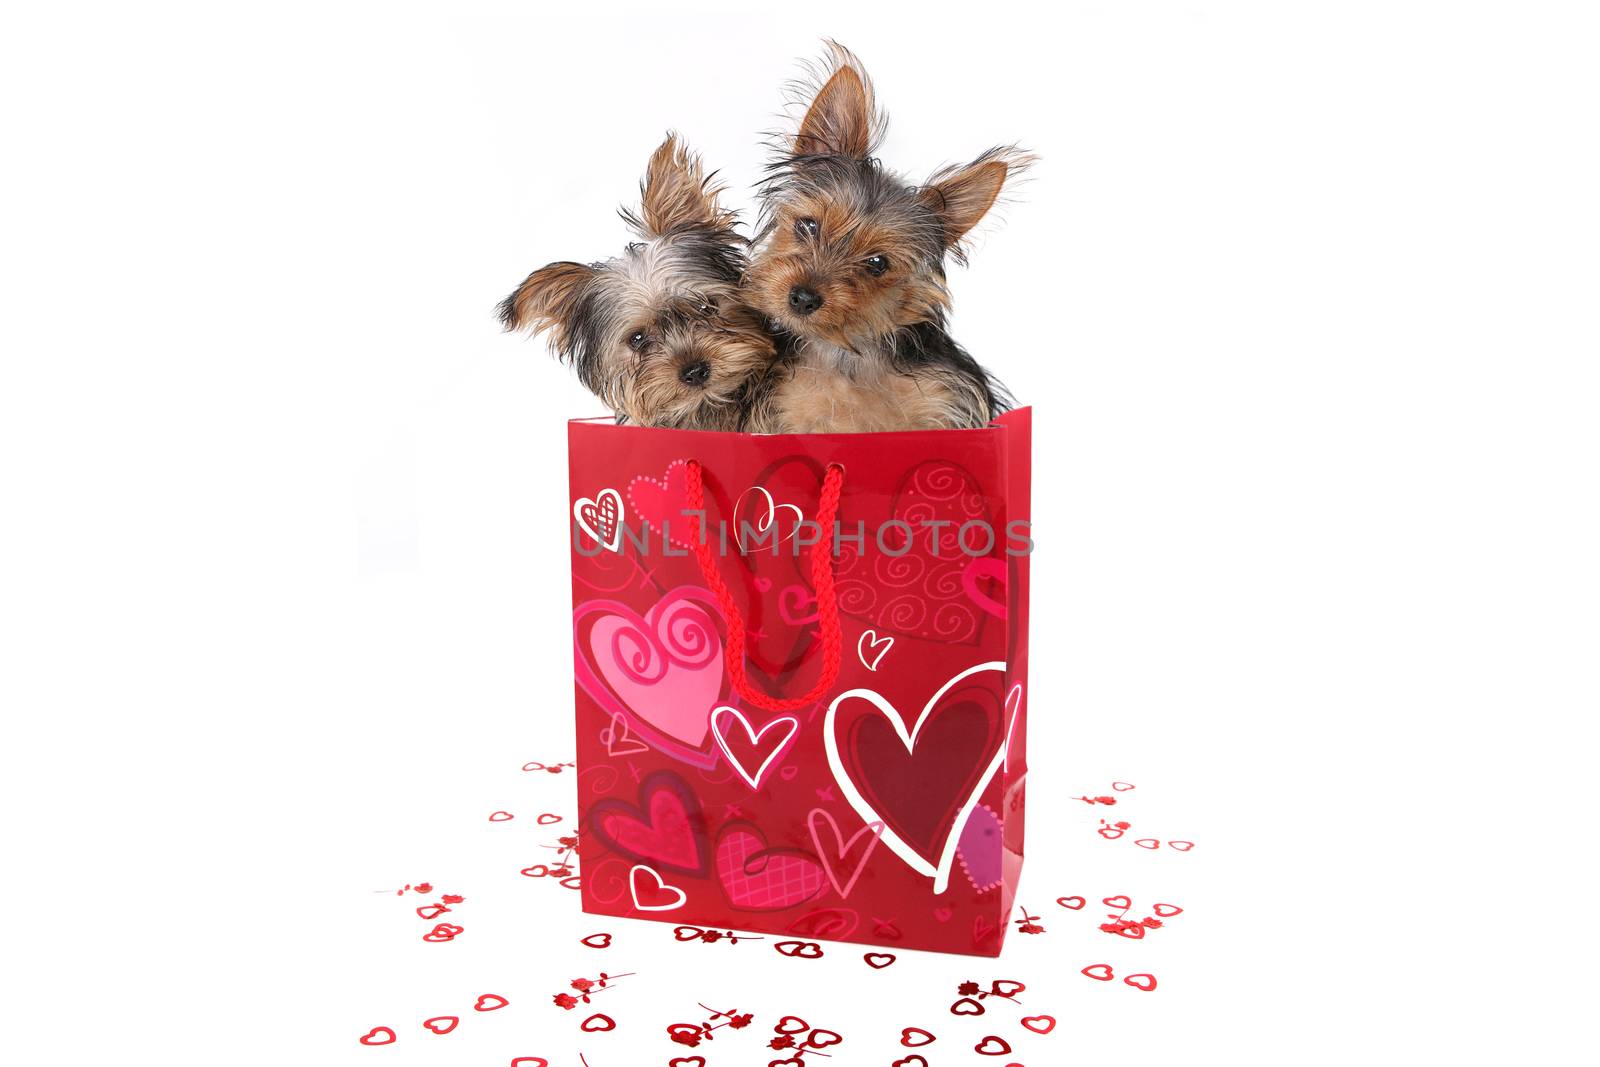 Adorable Yorkshire Terrier Puppies in a Valentine Themed Bag